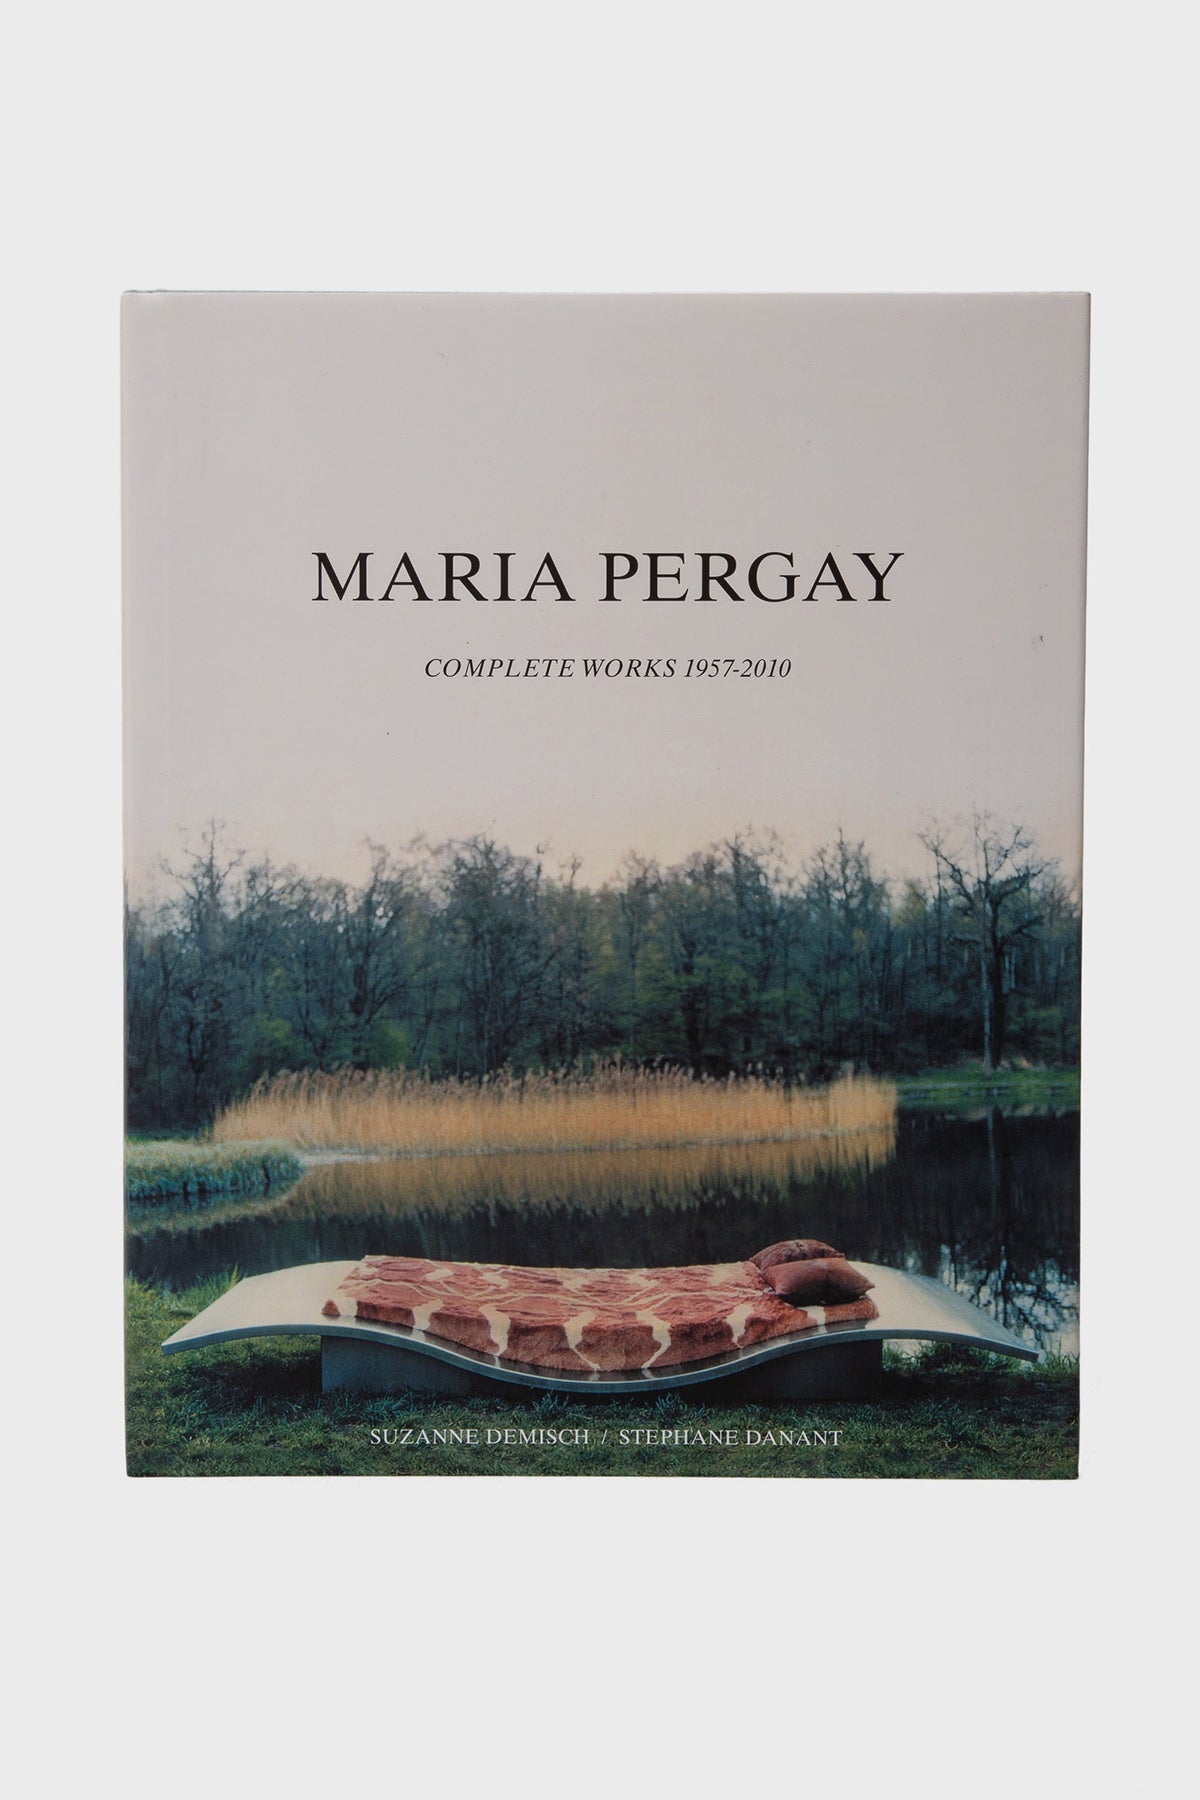 MAXFIELD PRIVATE COLLECTION | MARIA PERGAY: COMPLETE WORKS 1957-2010